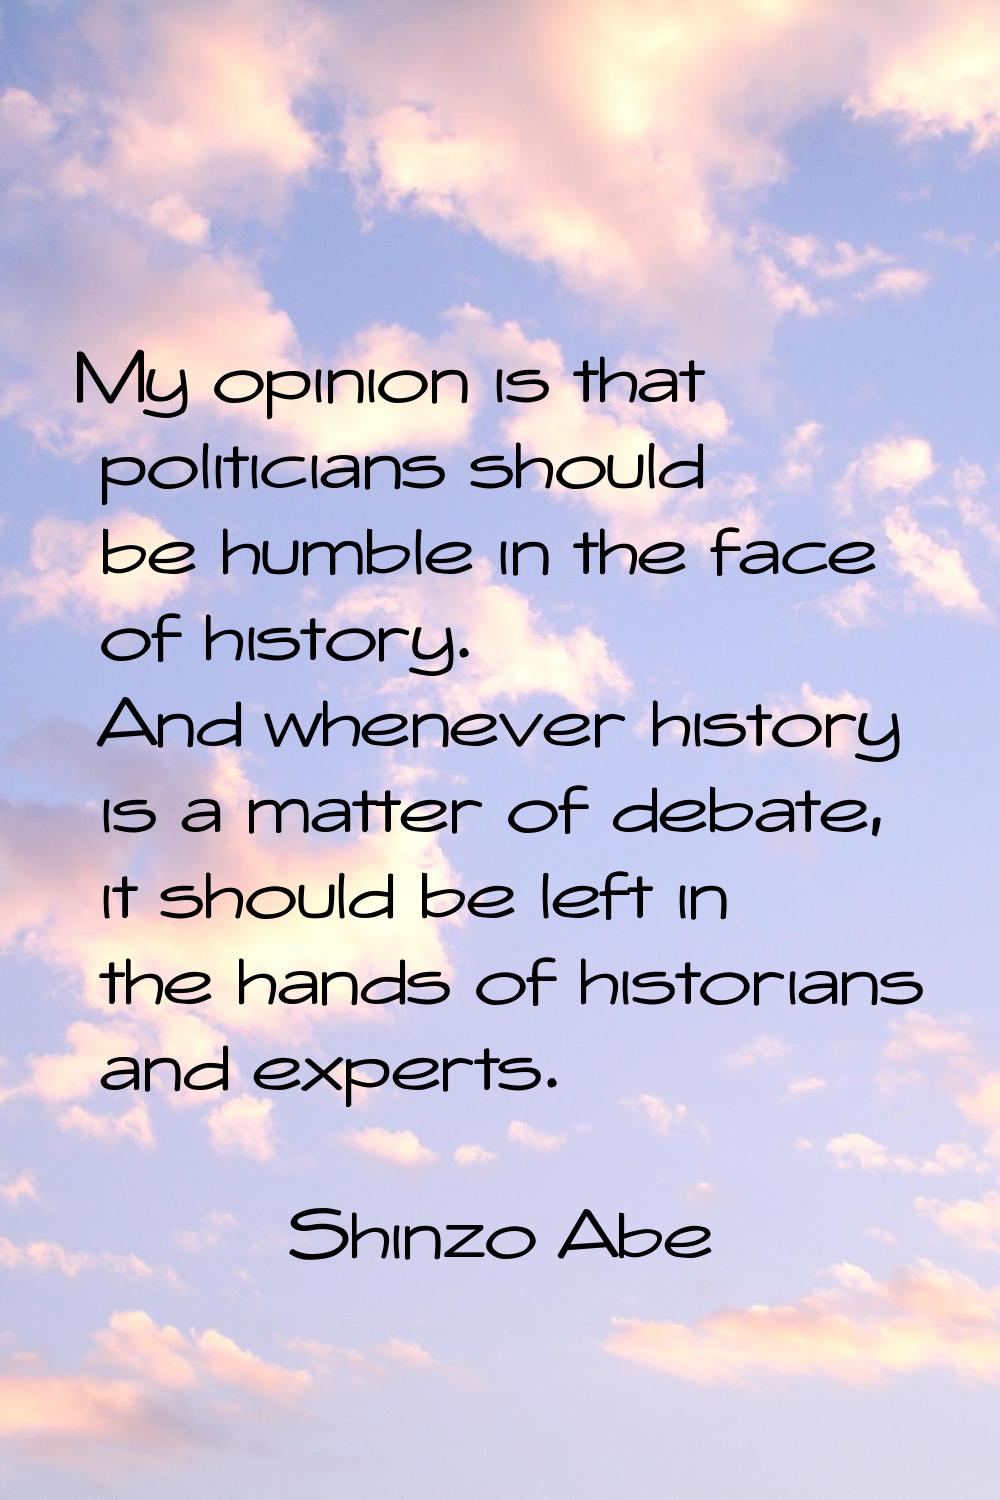 My opinion is that politicians should be humble in the face of history. And whenever history is a m